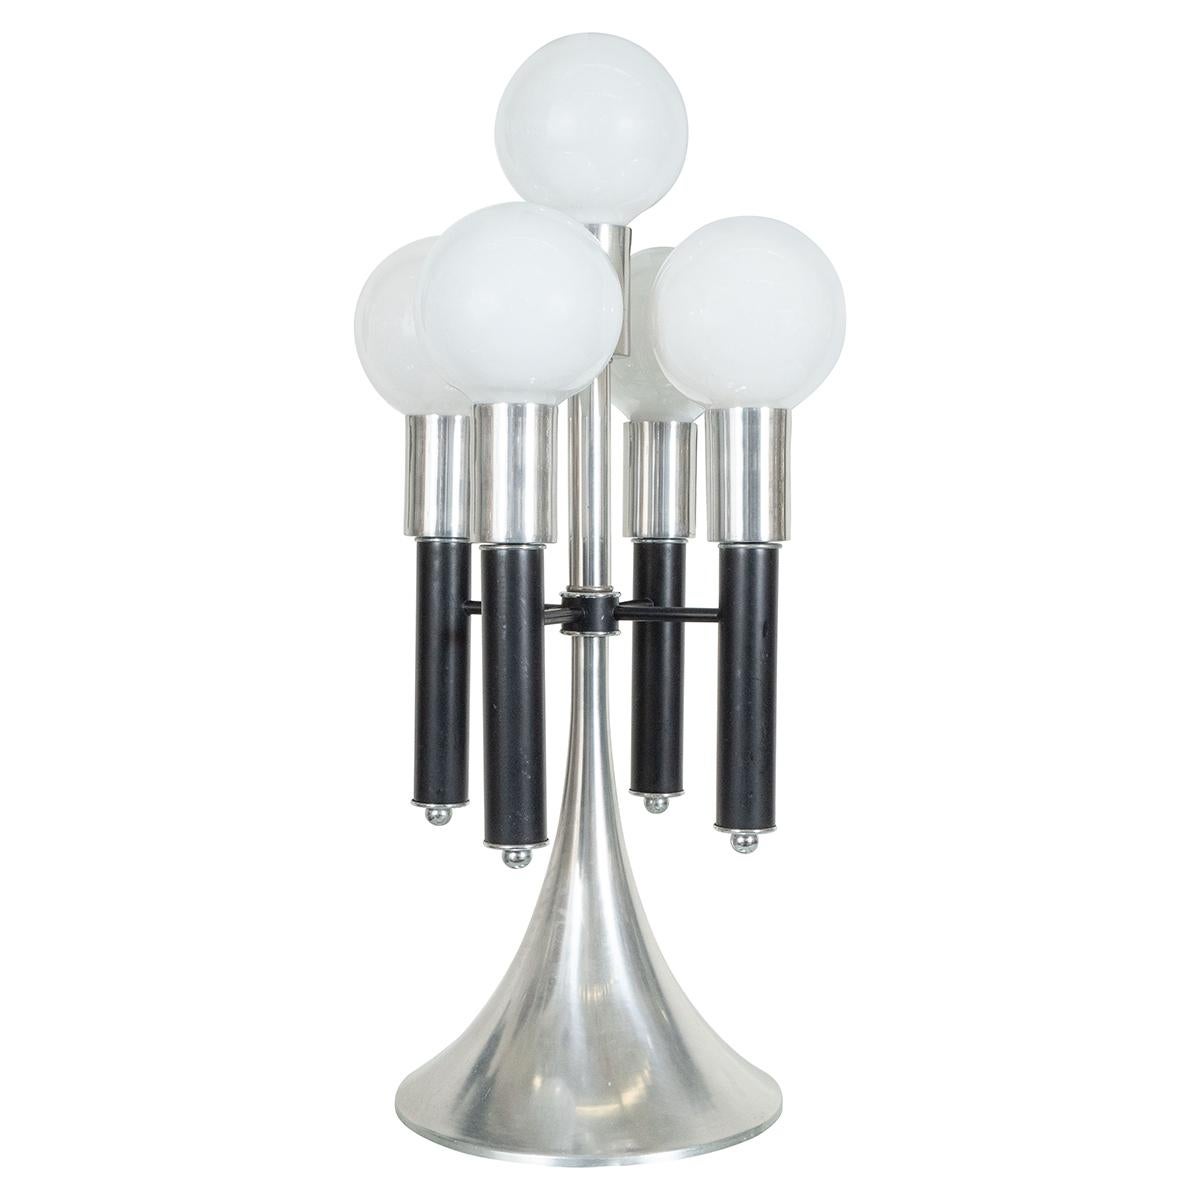 Single aluminum table lamp with black enameled metal details and integrated switch at base. Light bulbs not included.